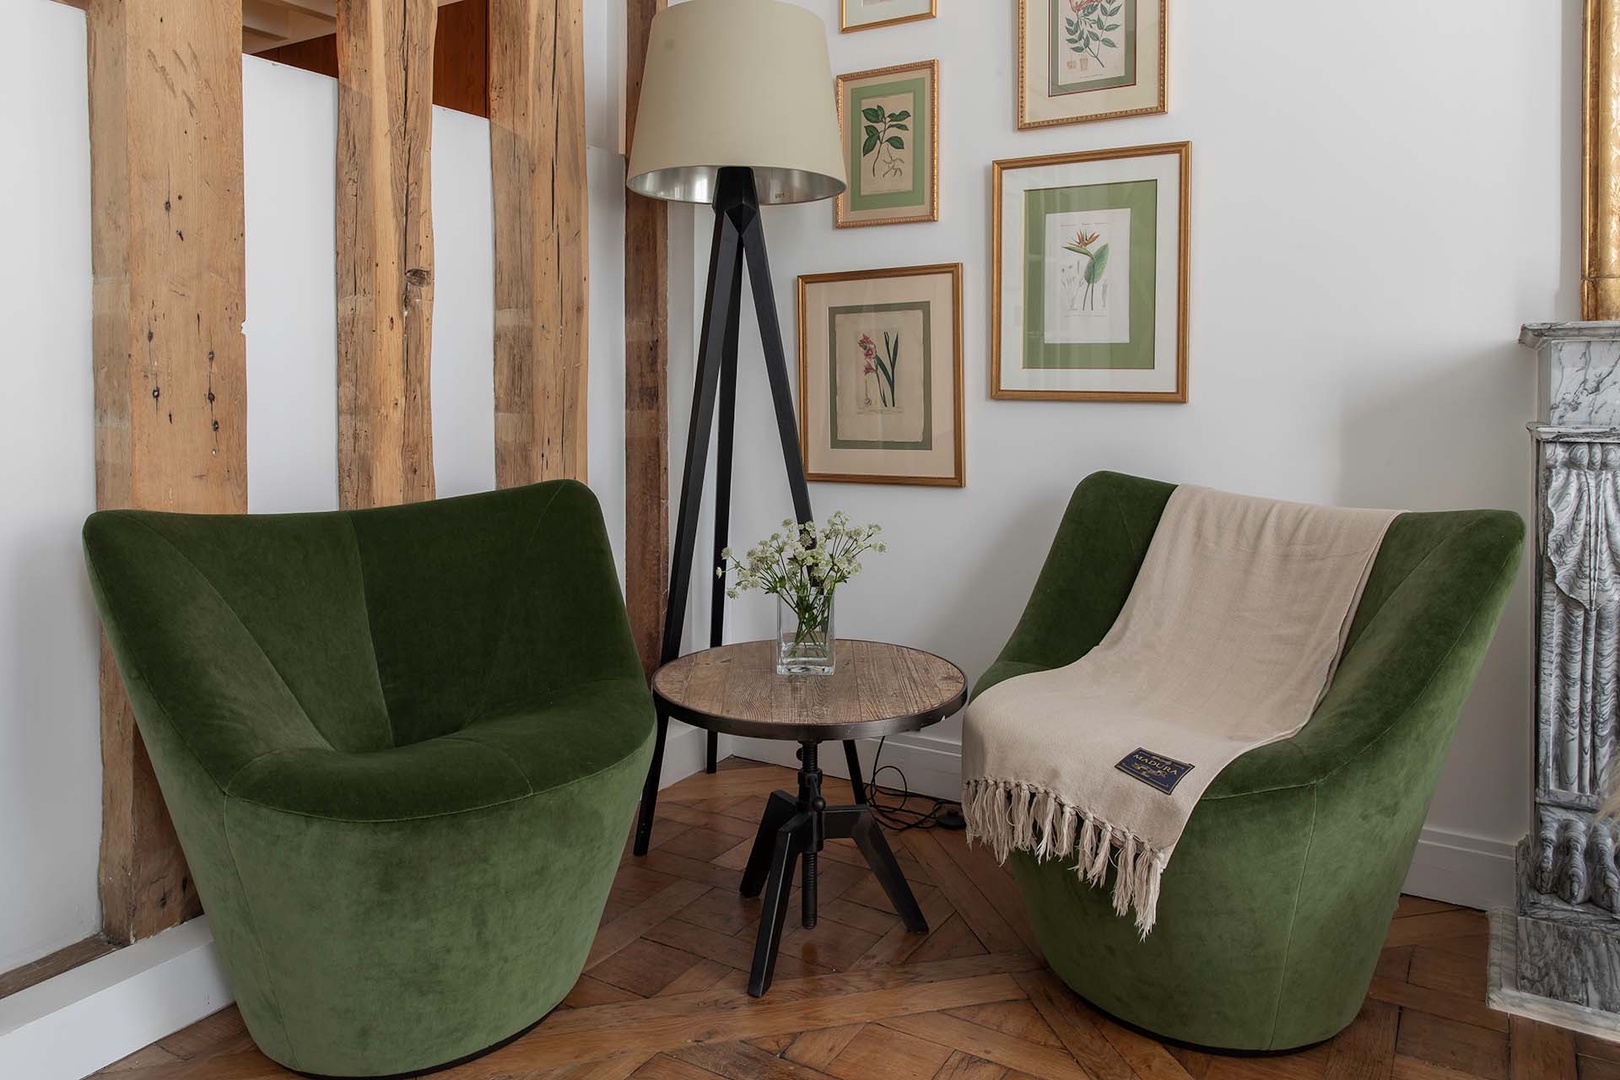 Two chic sitting chairs create a cozy corner.